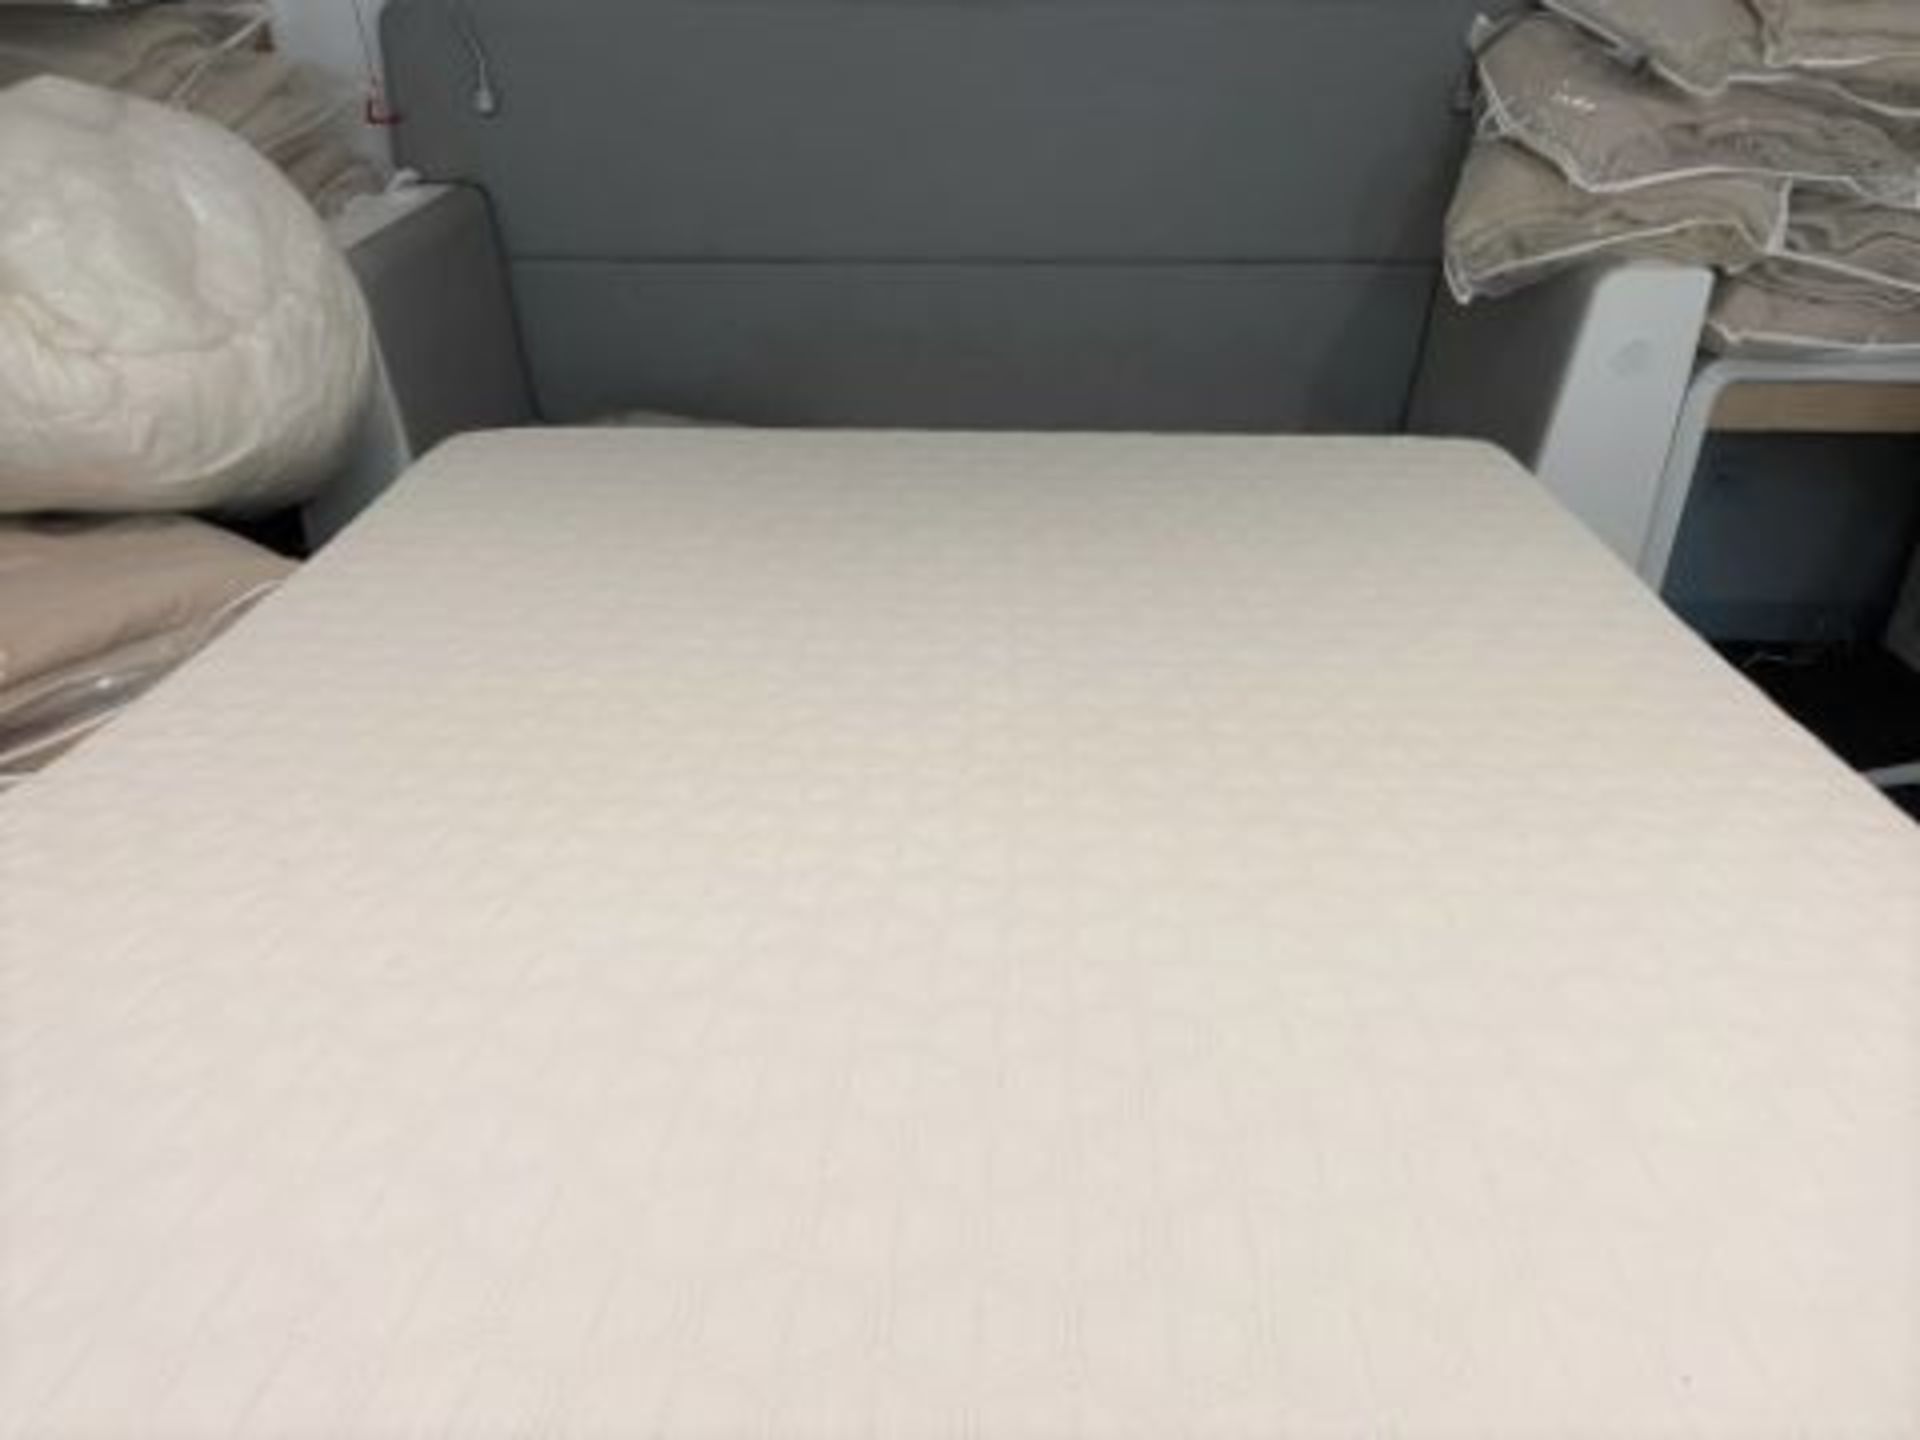 1 x Double Adjustable Space Saving Smart Bed With Serta Motion Memory Foam Mattress - Signature - Image 6 of 8